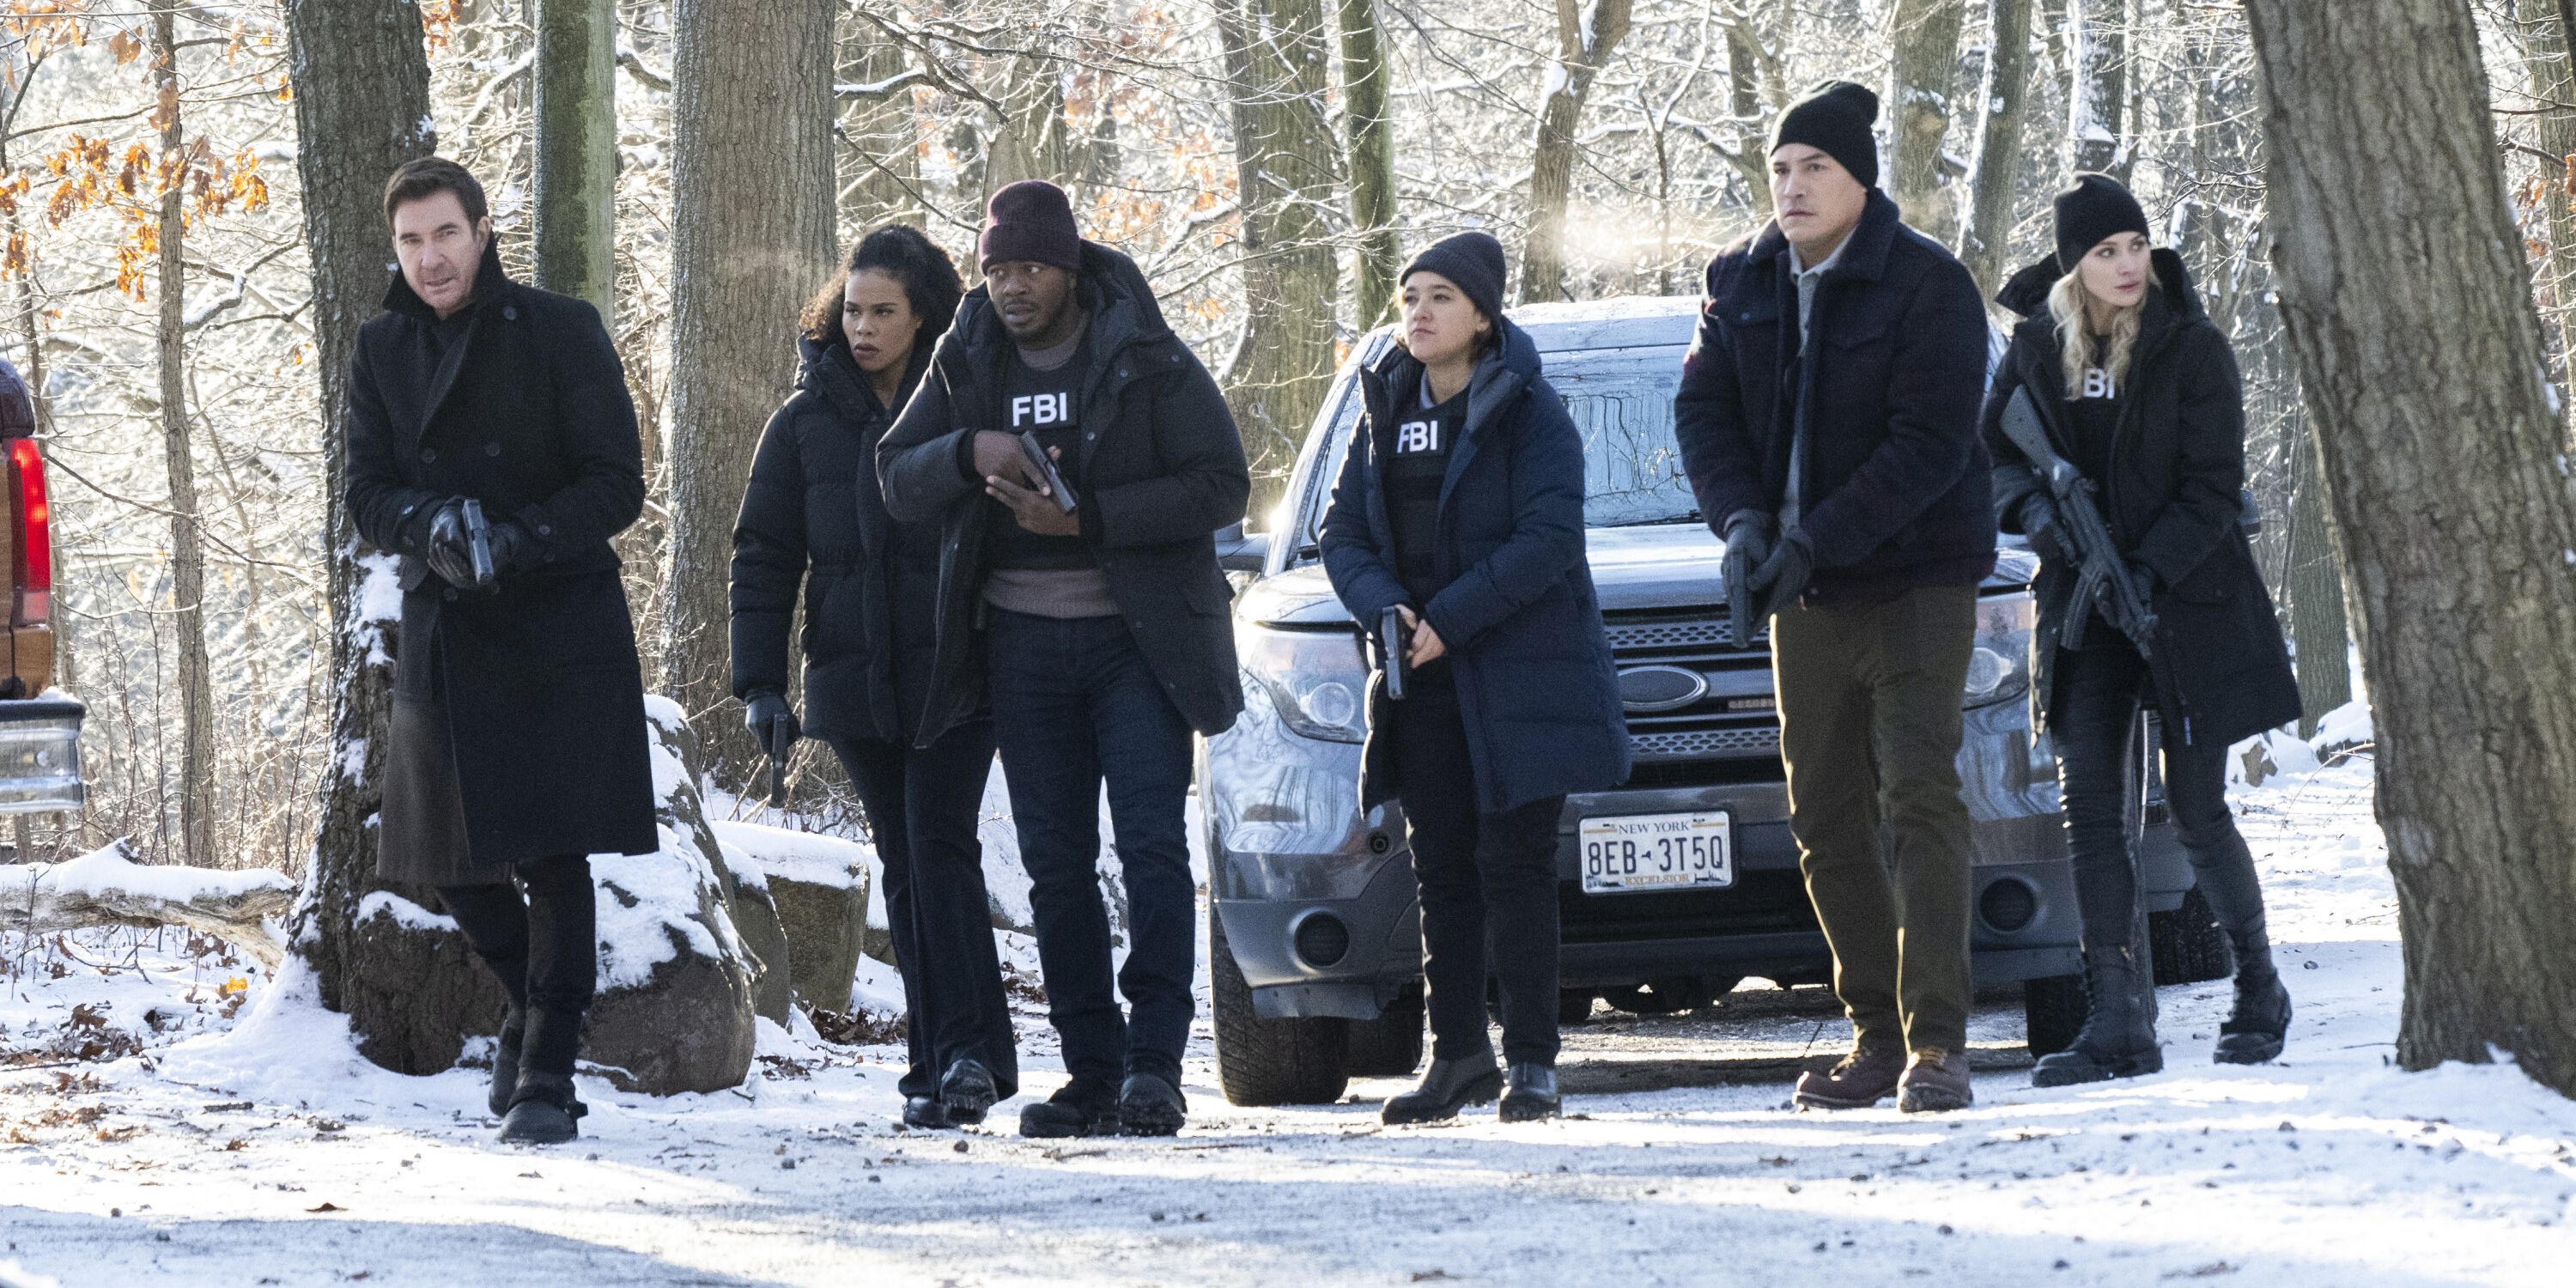 Dylan McDermott as Supervisory Special Agent Remy Scott, Roxy Sternberg as Special Agent Sheryll Barnes, Edwin Hodge as Special Agent Ray Cannon, Keisha Castle-Hughes as Special Agent Hana Gibson, Eddie Spears as SRA Whitehawk, and Shantel VanSanten as Special Agent Nina Chase in FBI: Most Wanted.